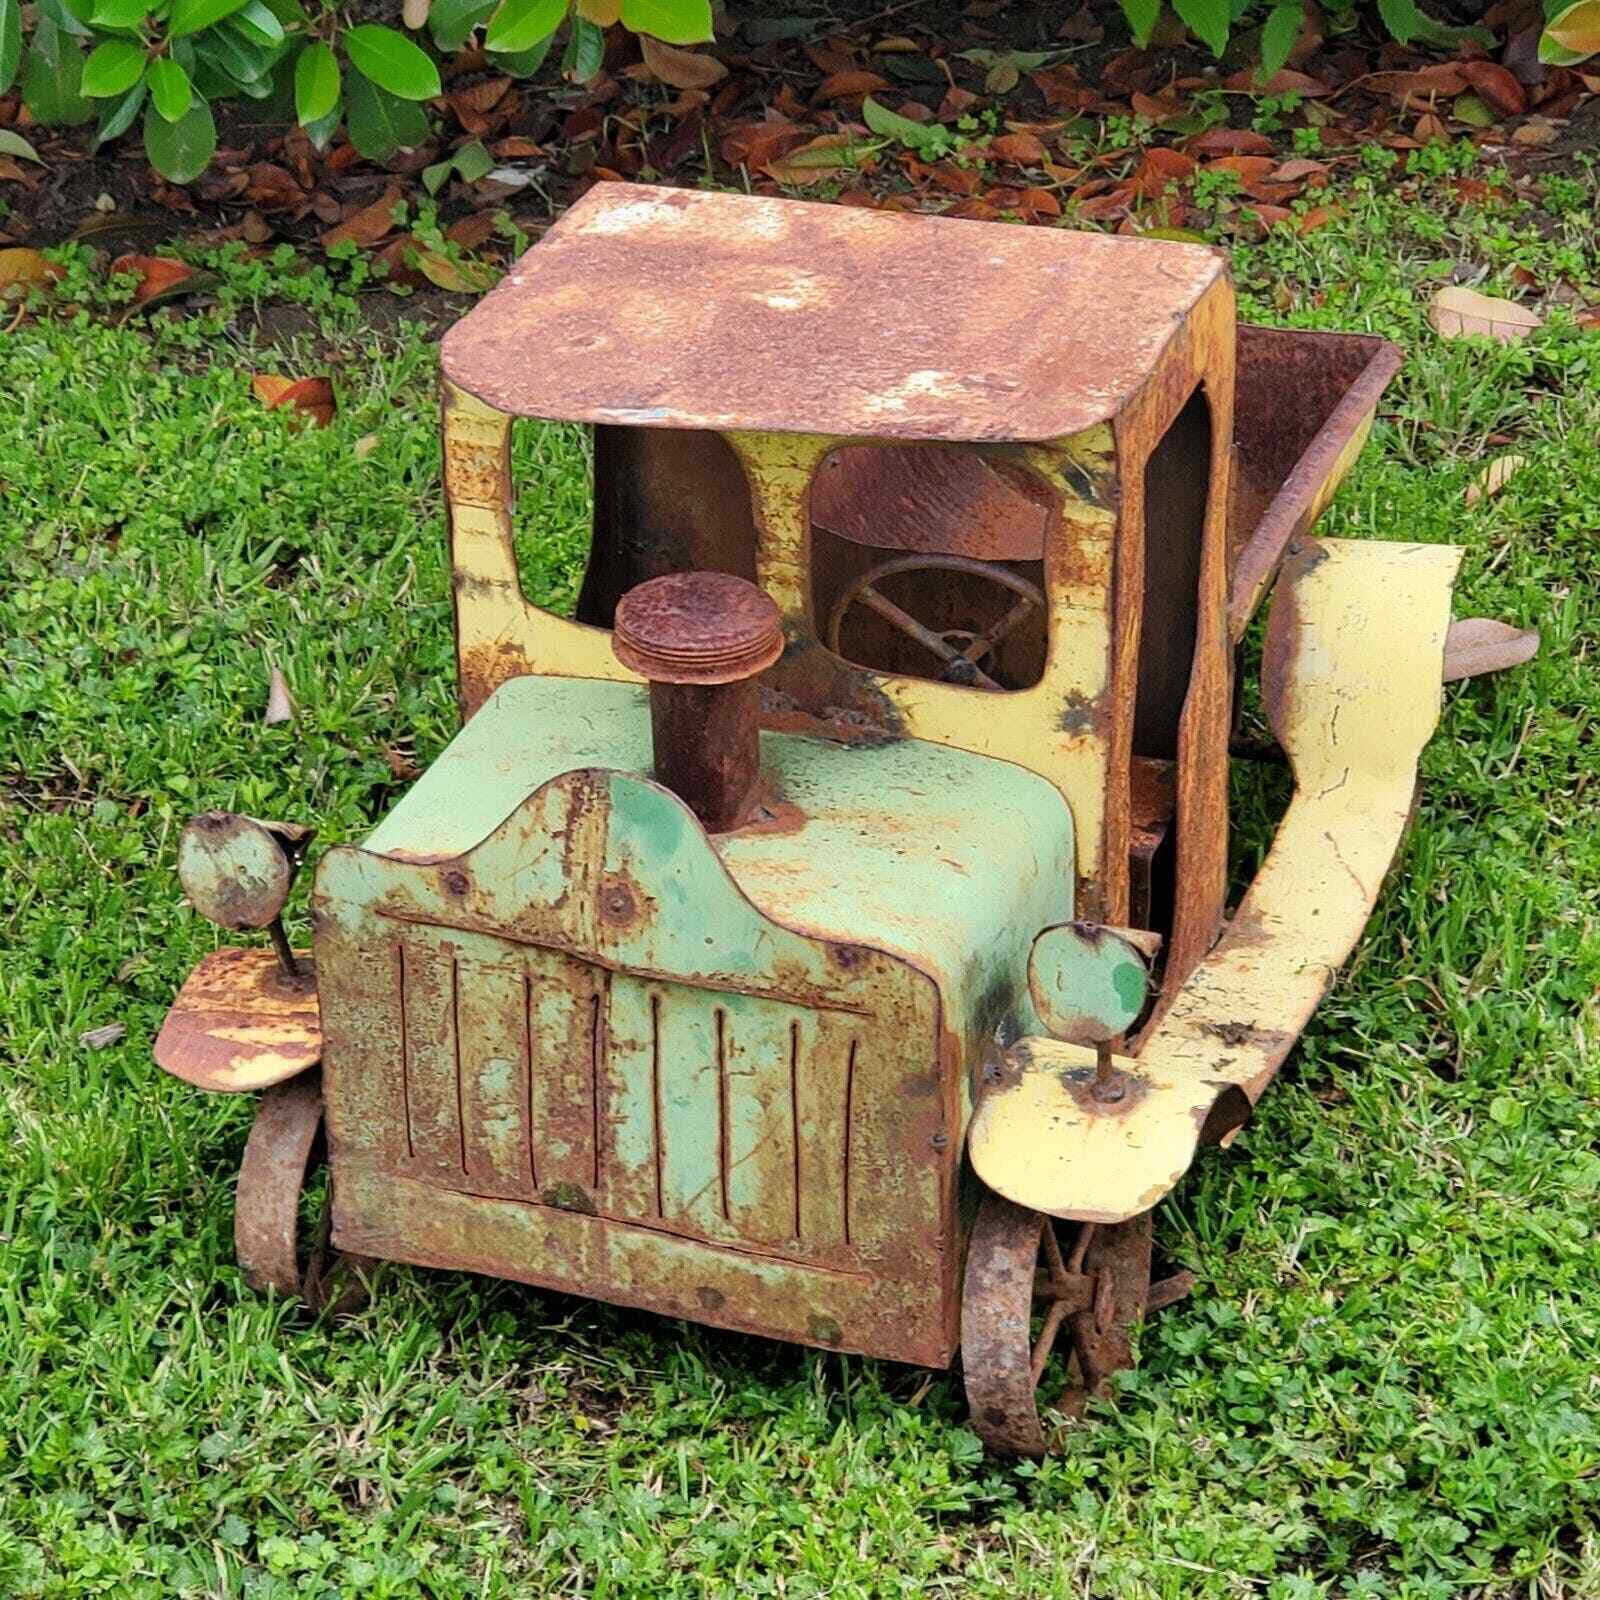 Vintage Rustic Metal Old Truck Yard ART Planter Handcrafted 24x16x16 Inch